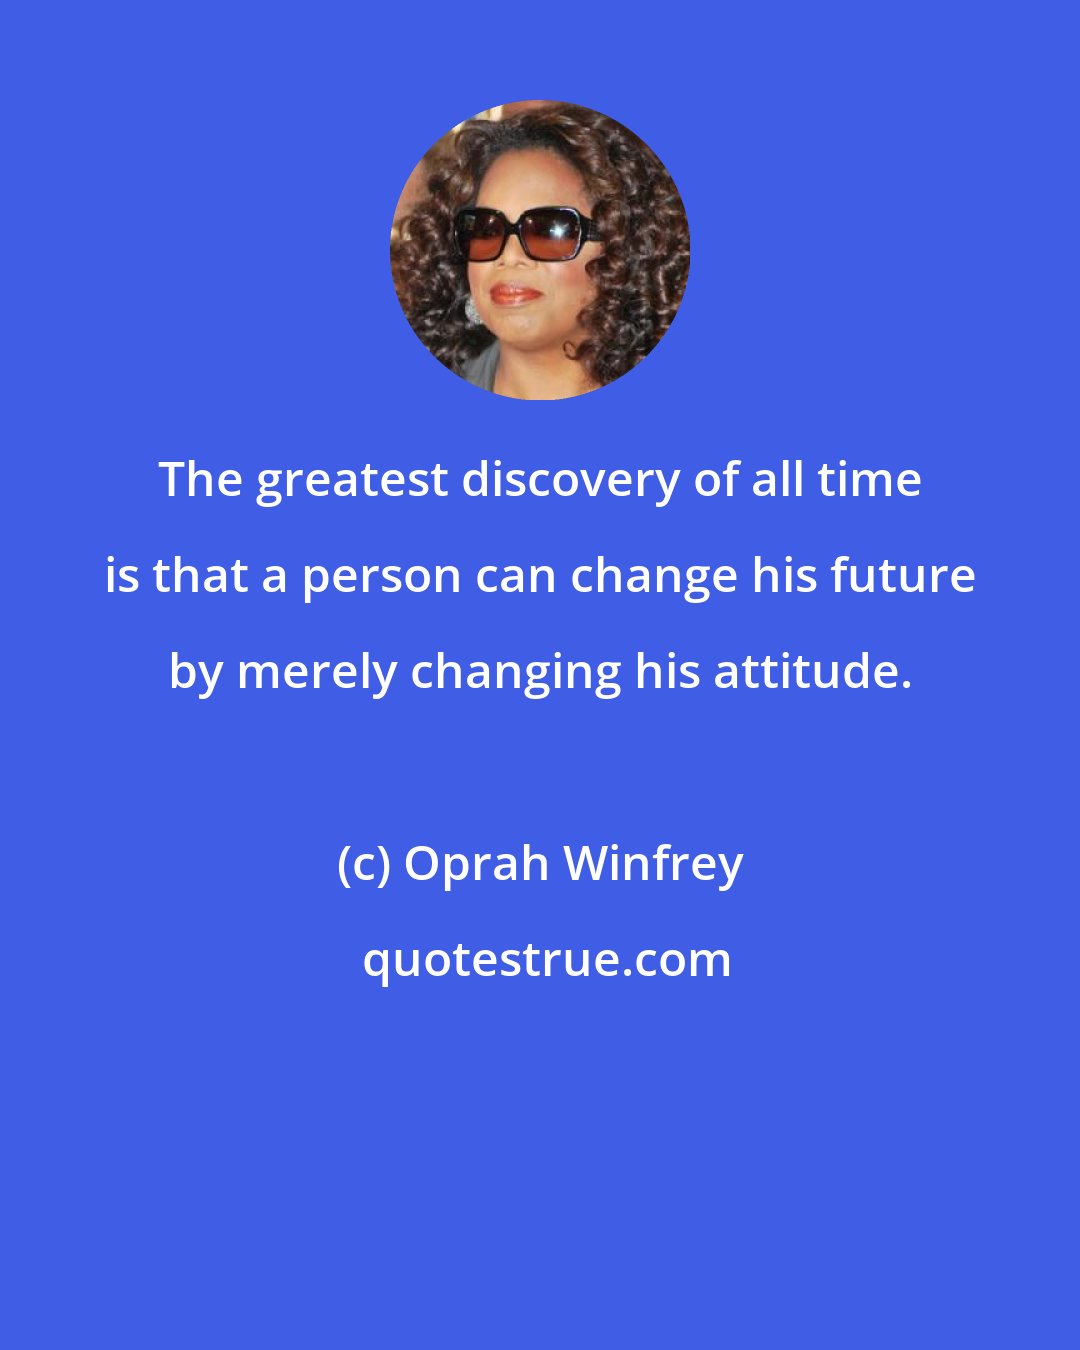 Oprah Winfrey: The greatest discovery of all time is that a person can change his future by merely changing his attitude.